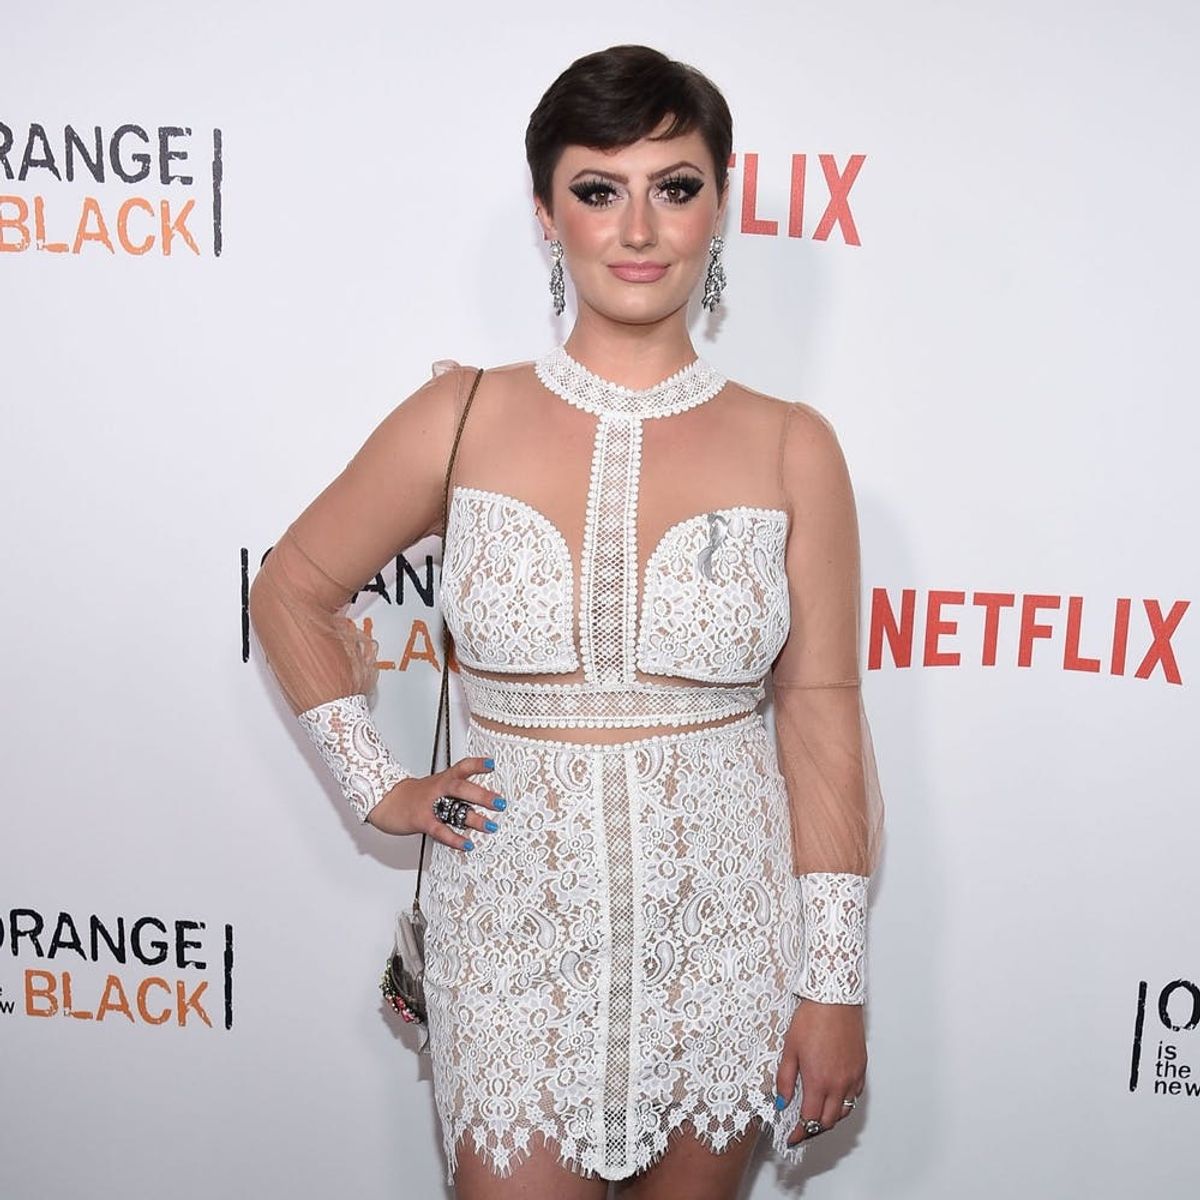 This OITNB Actress’s Off-Set Look Will Shock You